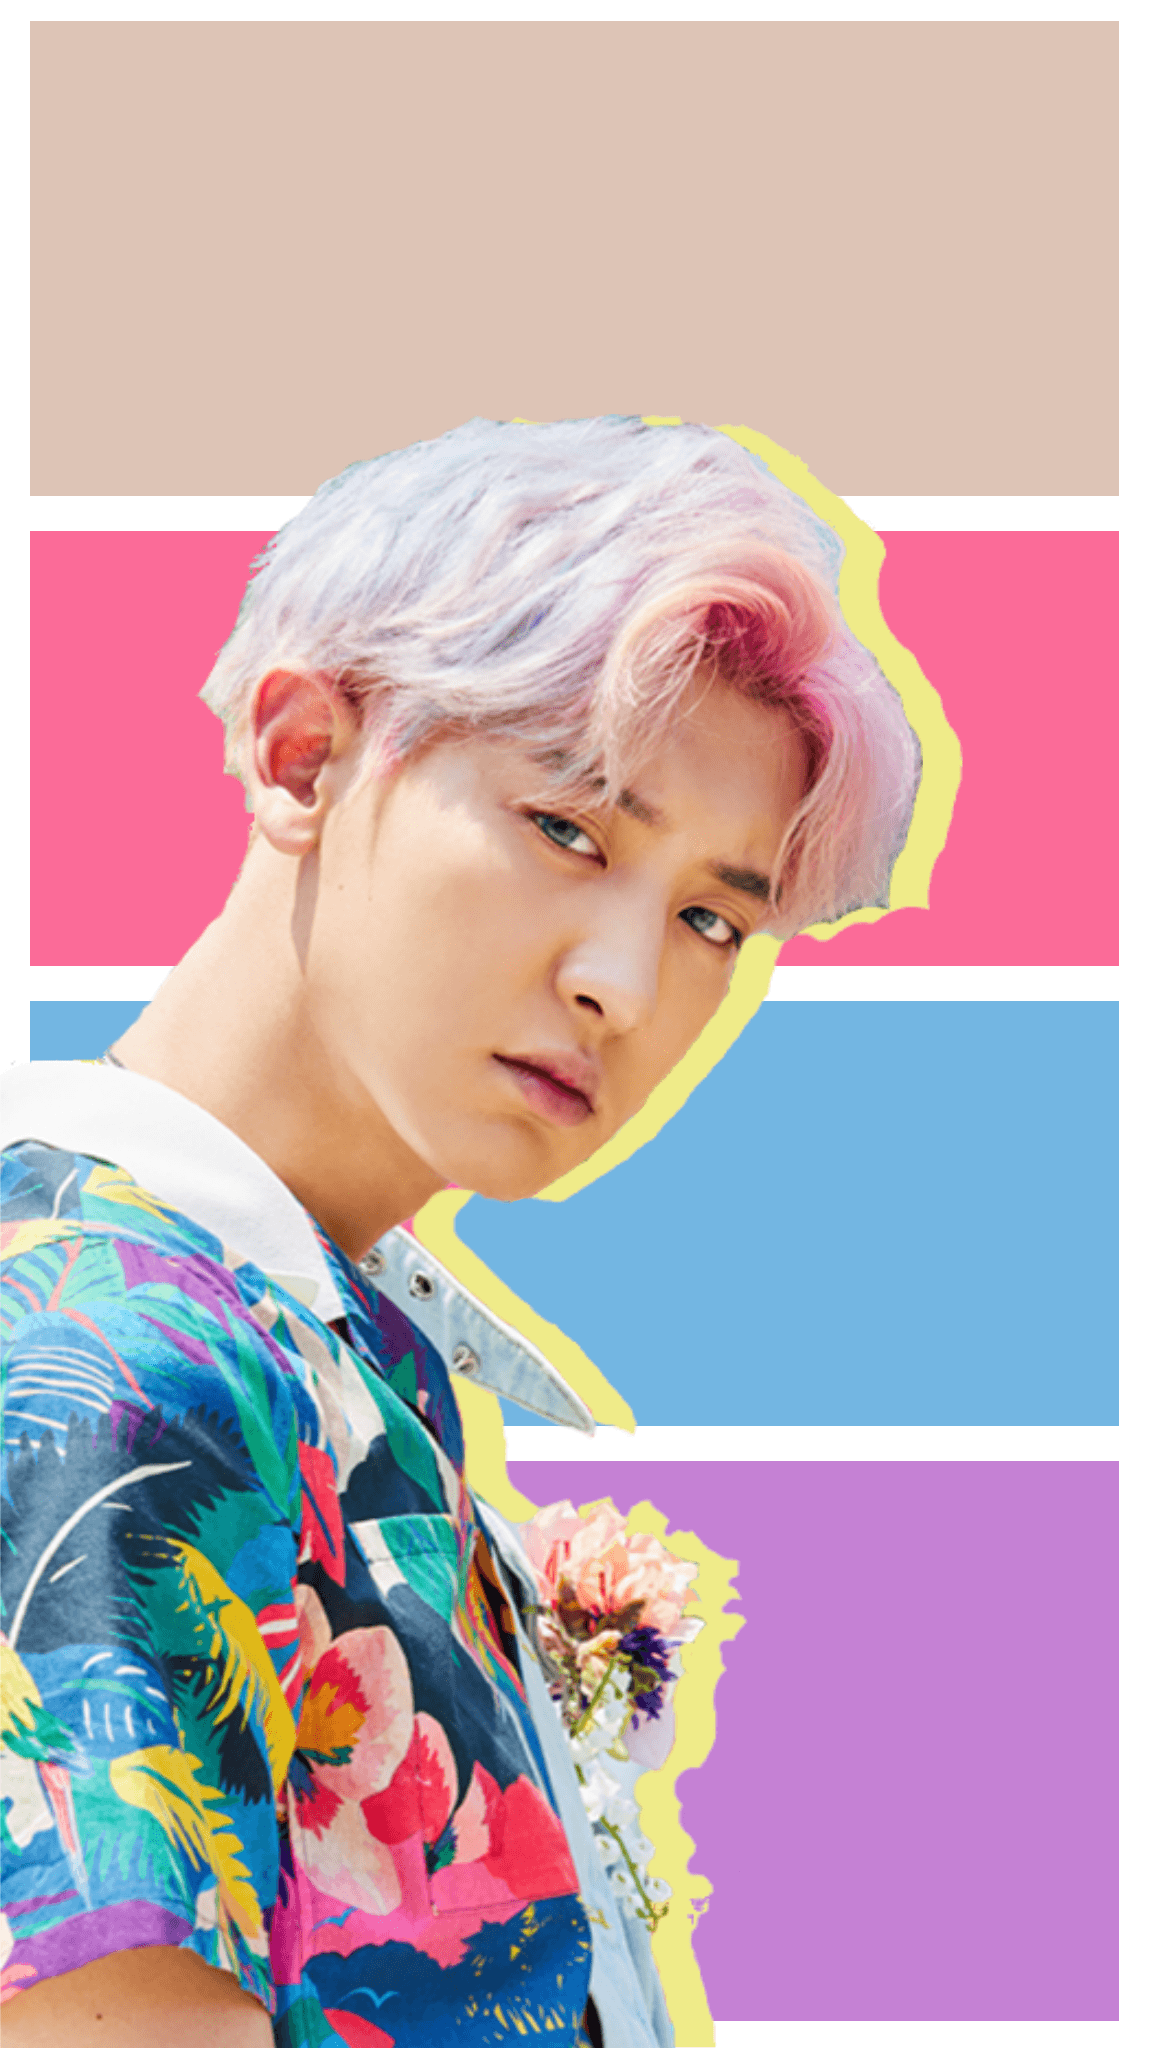 Exo Chanyeol Wallpaper, image collections of wallpaper